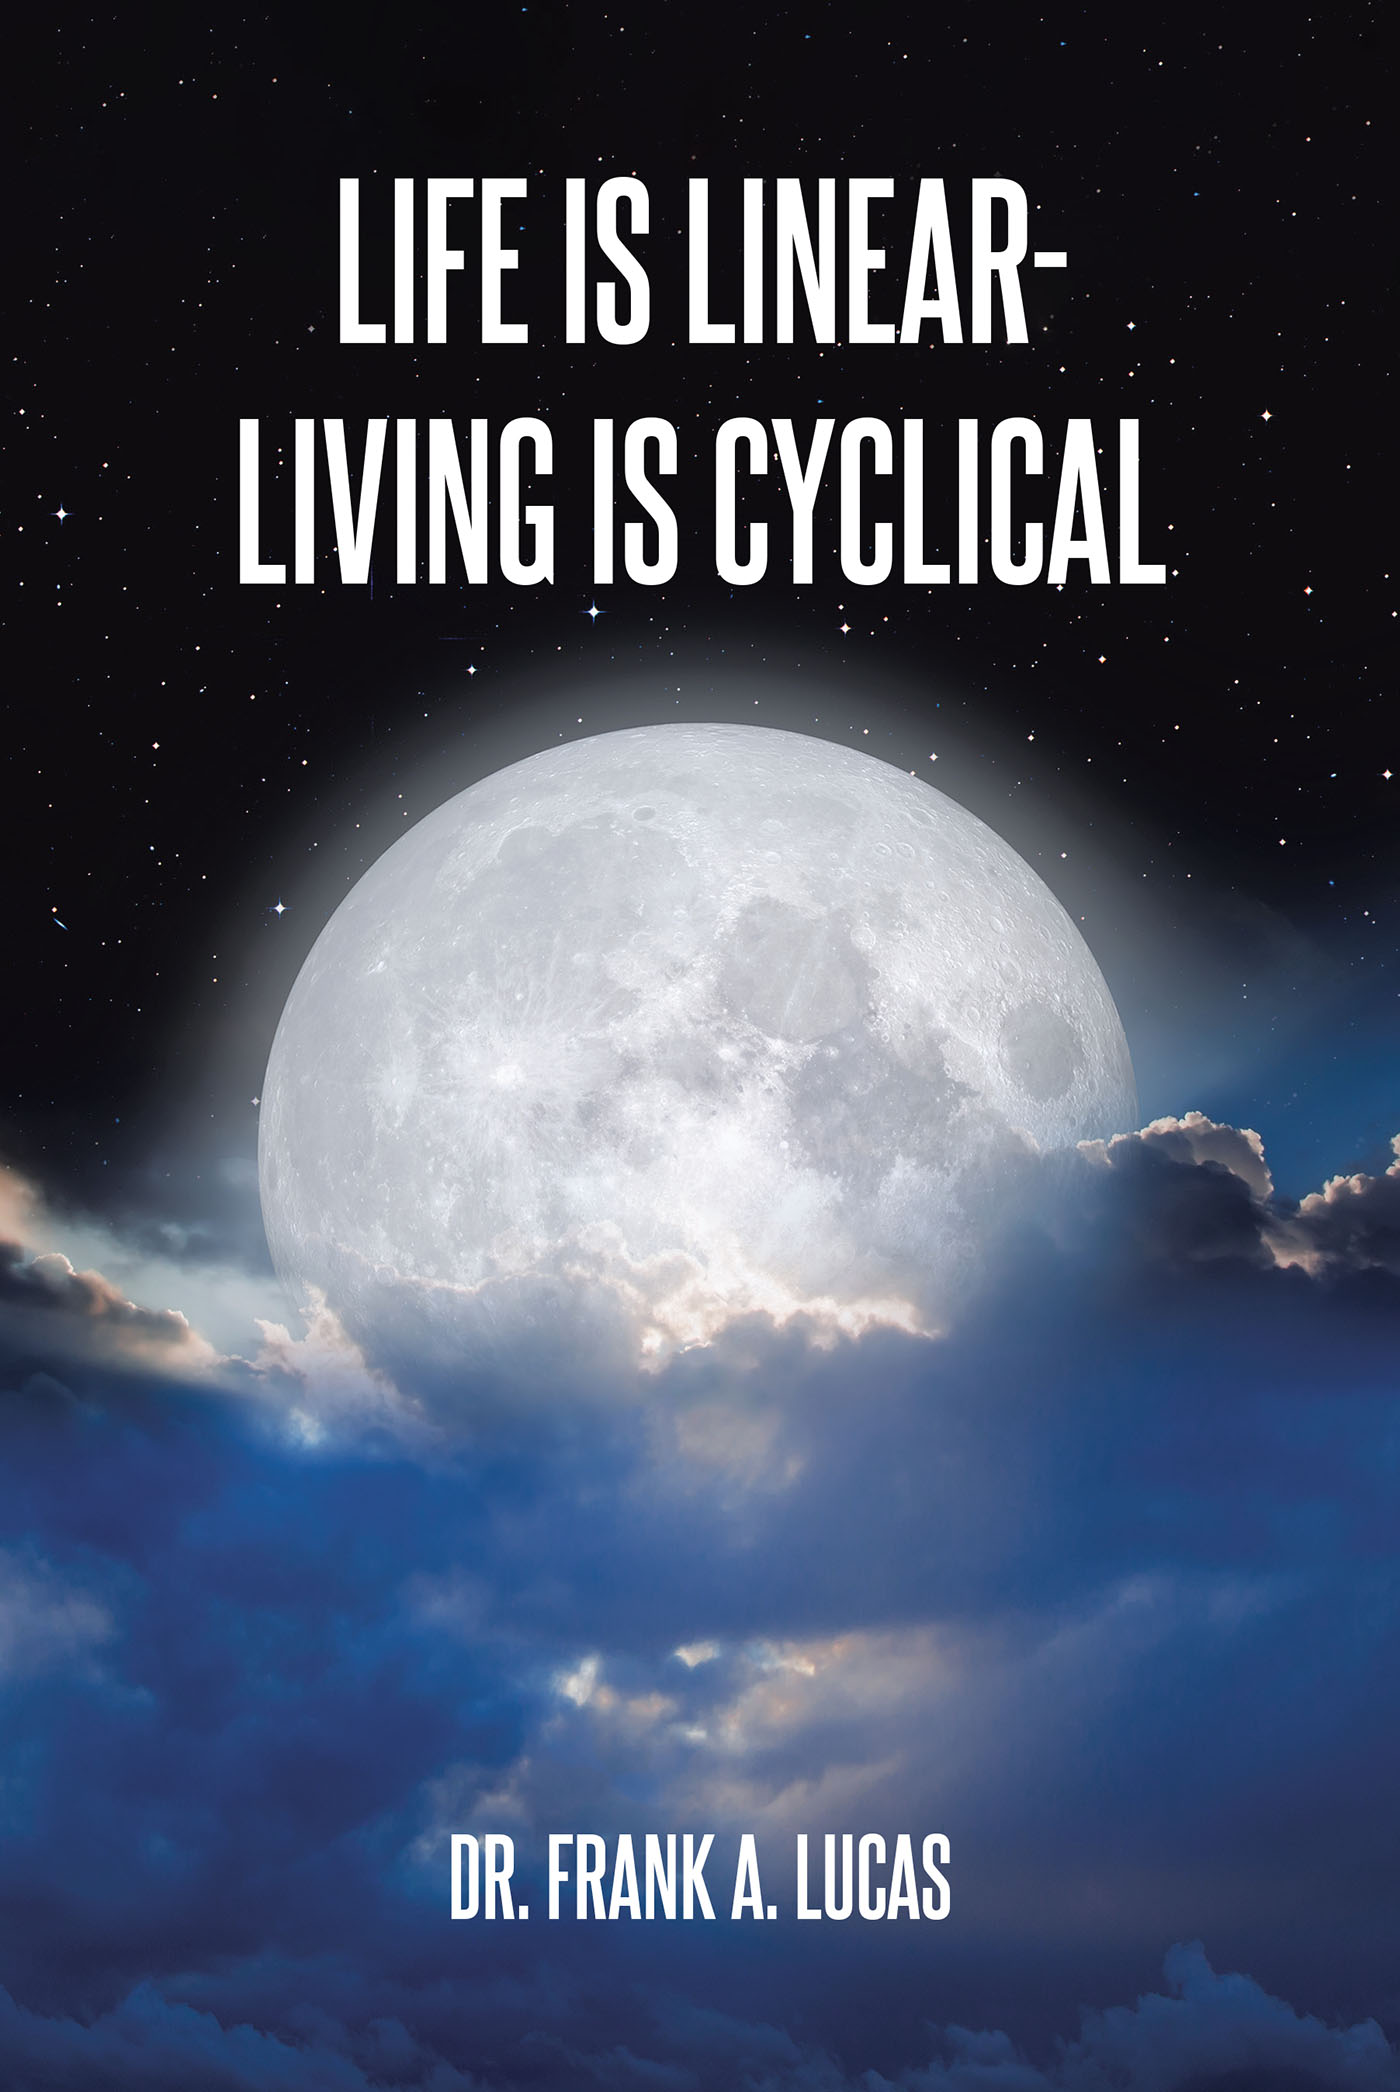 Dr. Frank A. Lucas’s Newly Released “Life Is Linear - Living Is Cyclical” is a Thoughtful Reflection of Key Questions Discovered Along Life’s Path